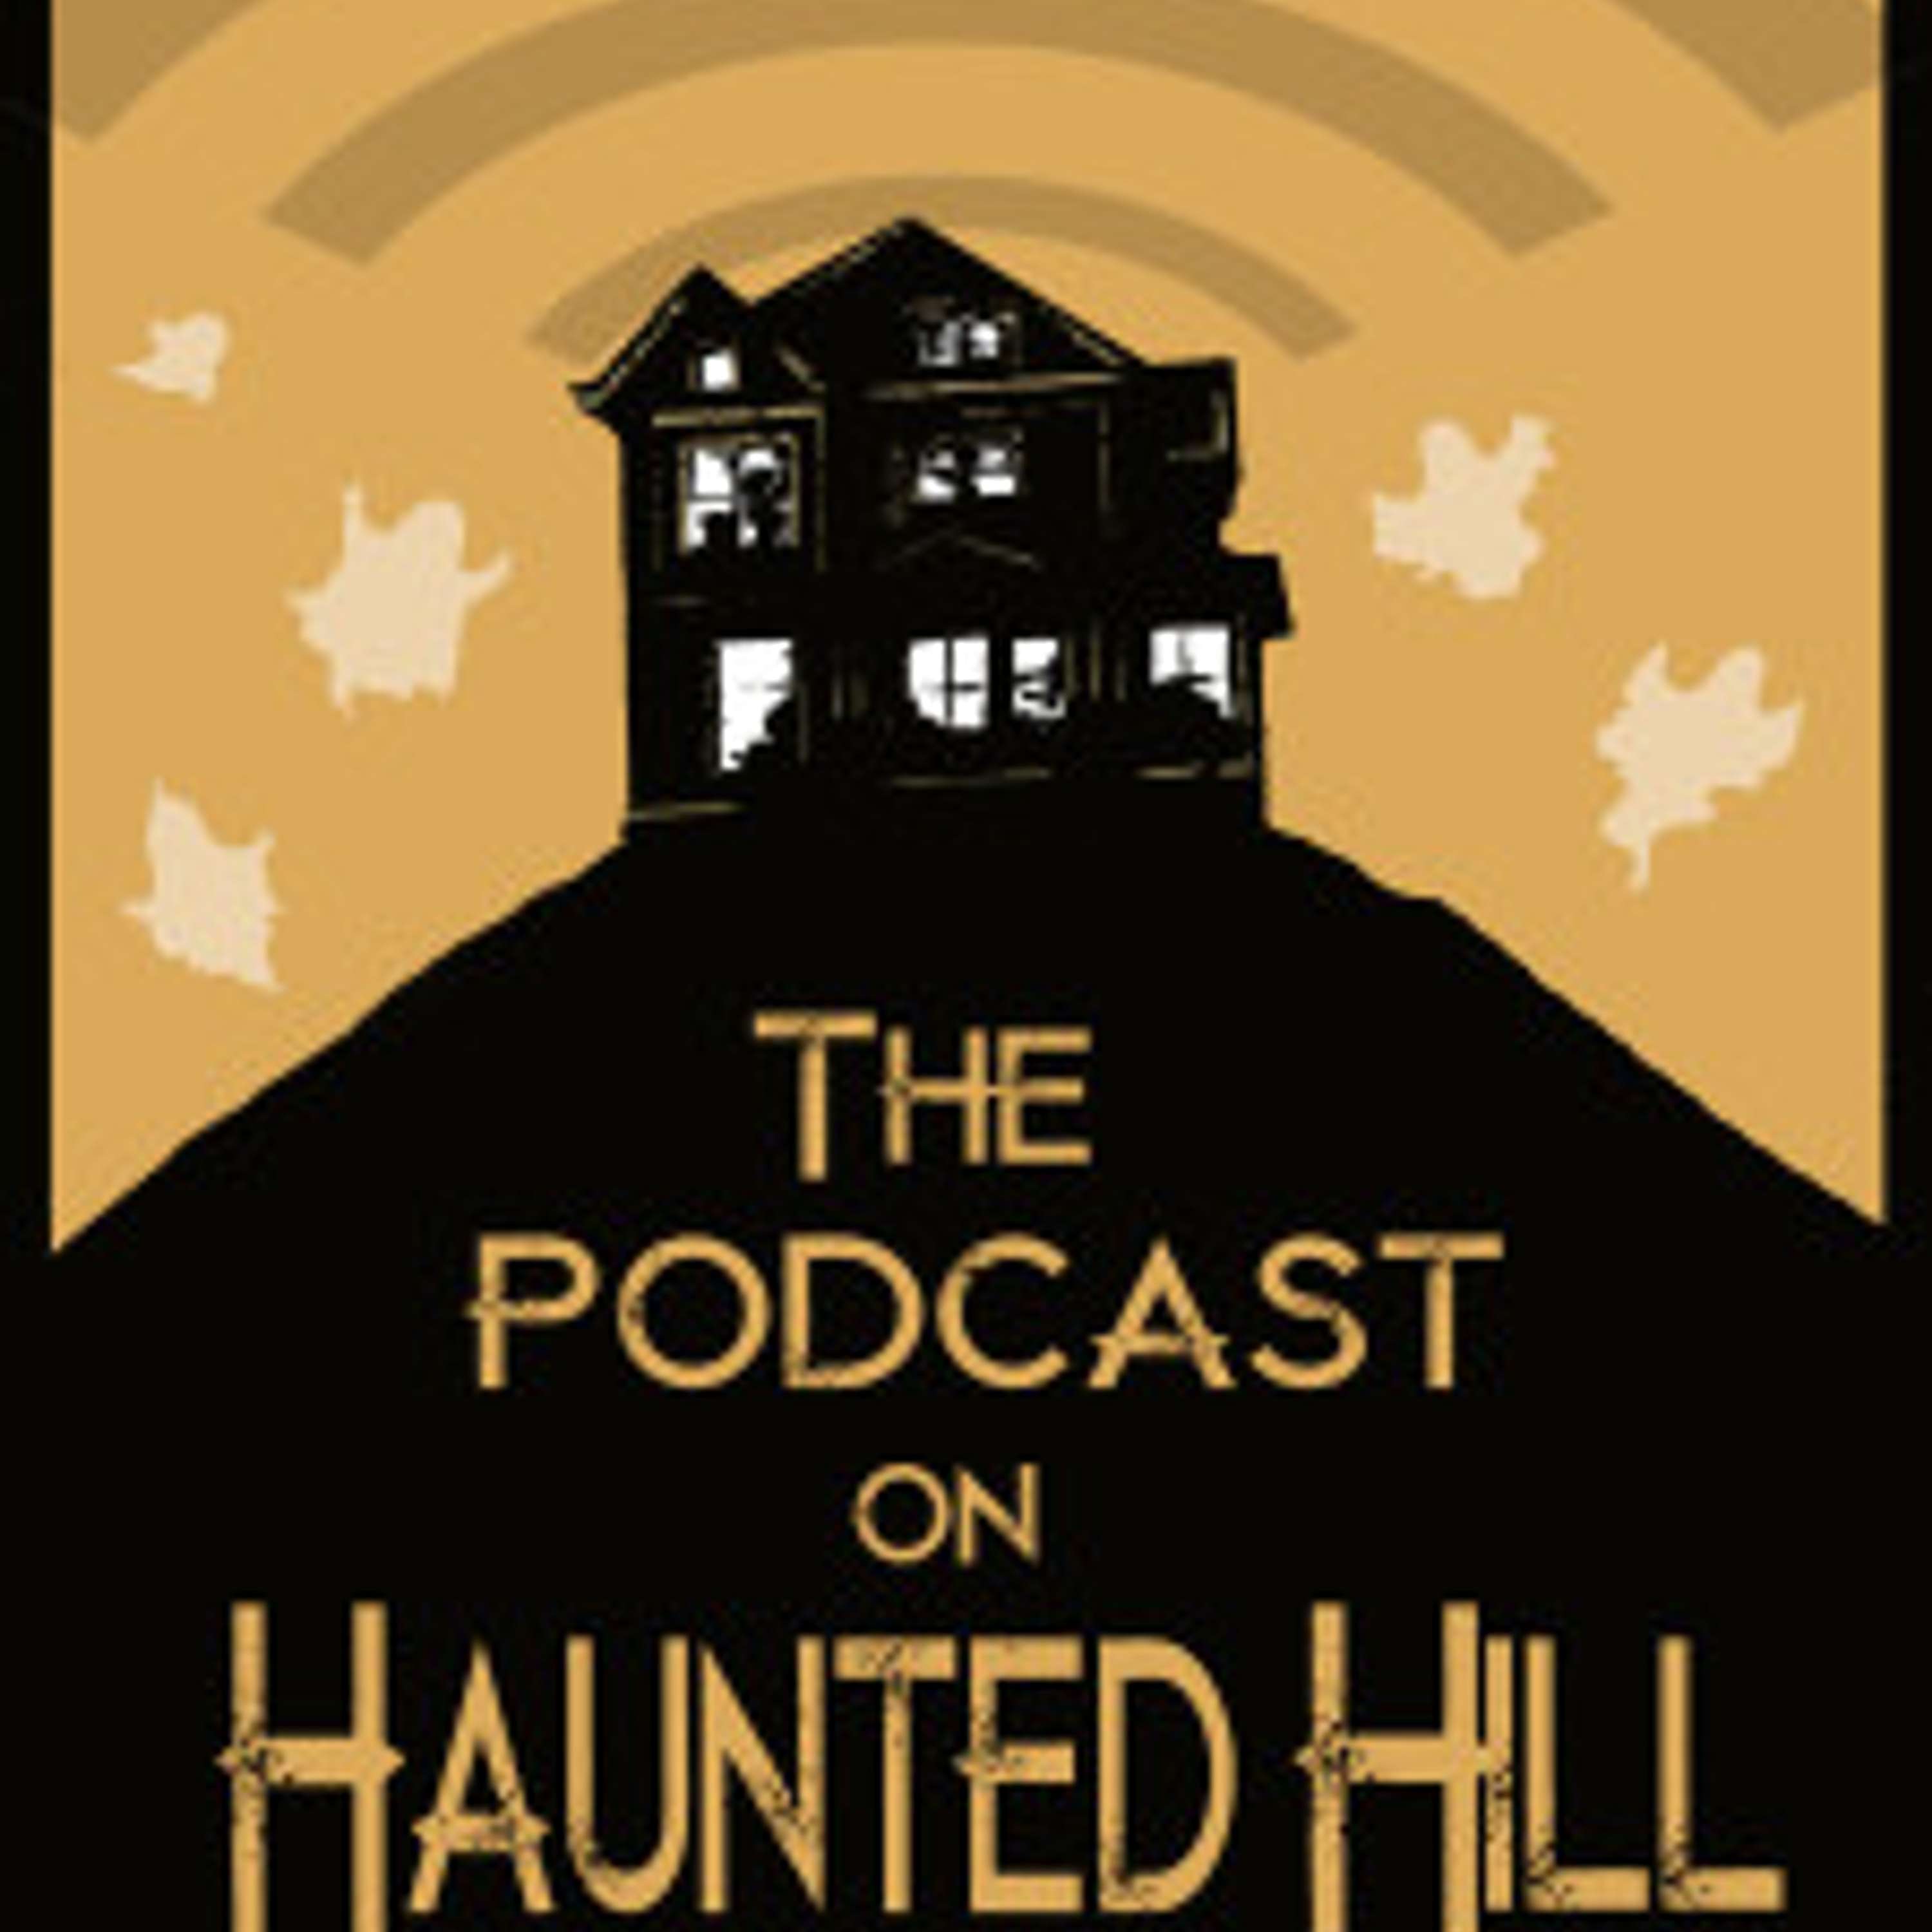 THE PODCAST ON HAUNTED HILL EPISODE 64.5 FRIGHTFEST 2018